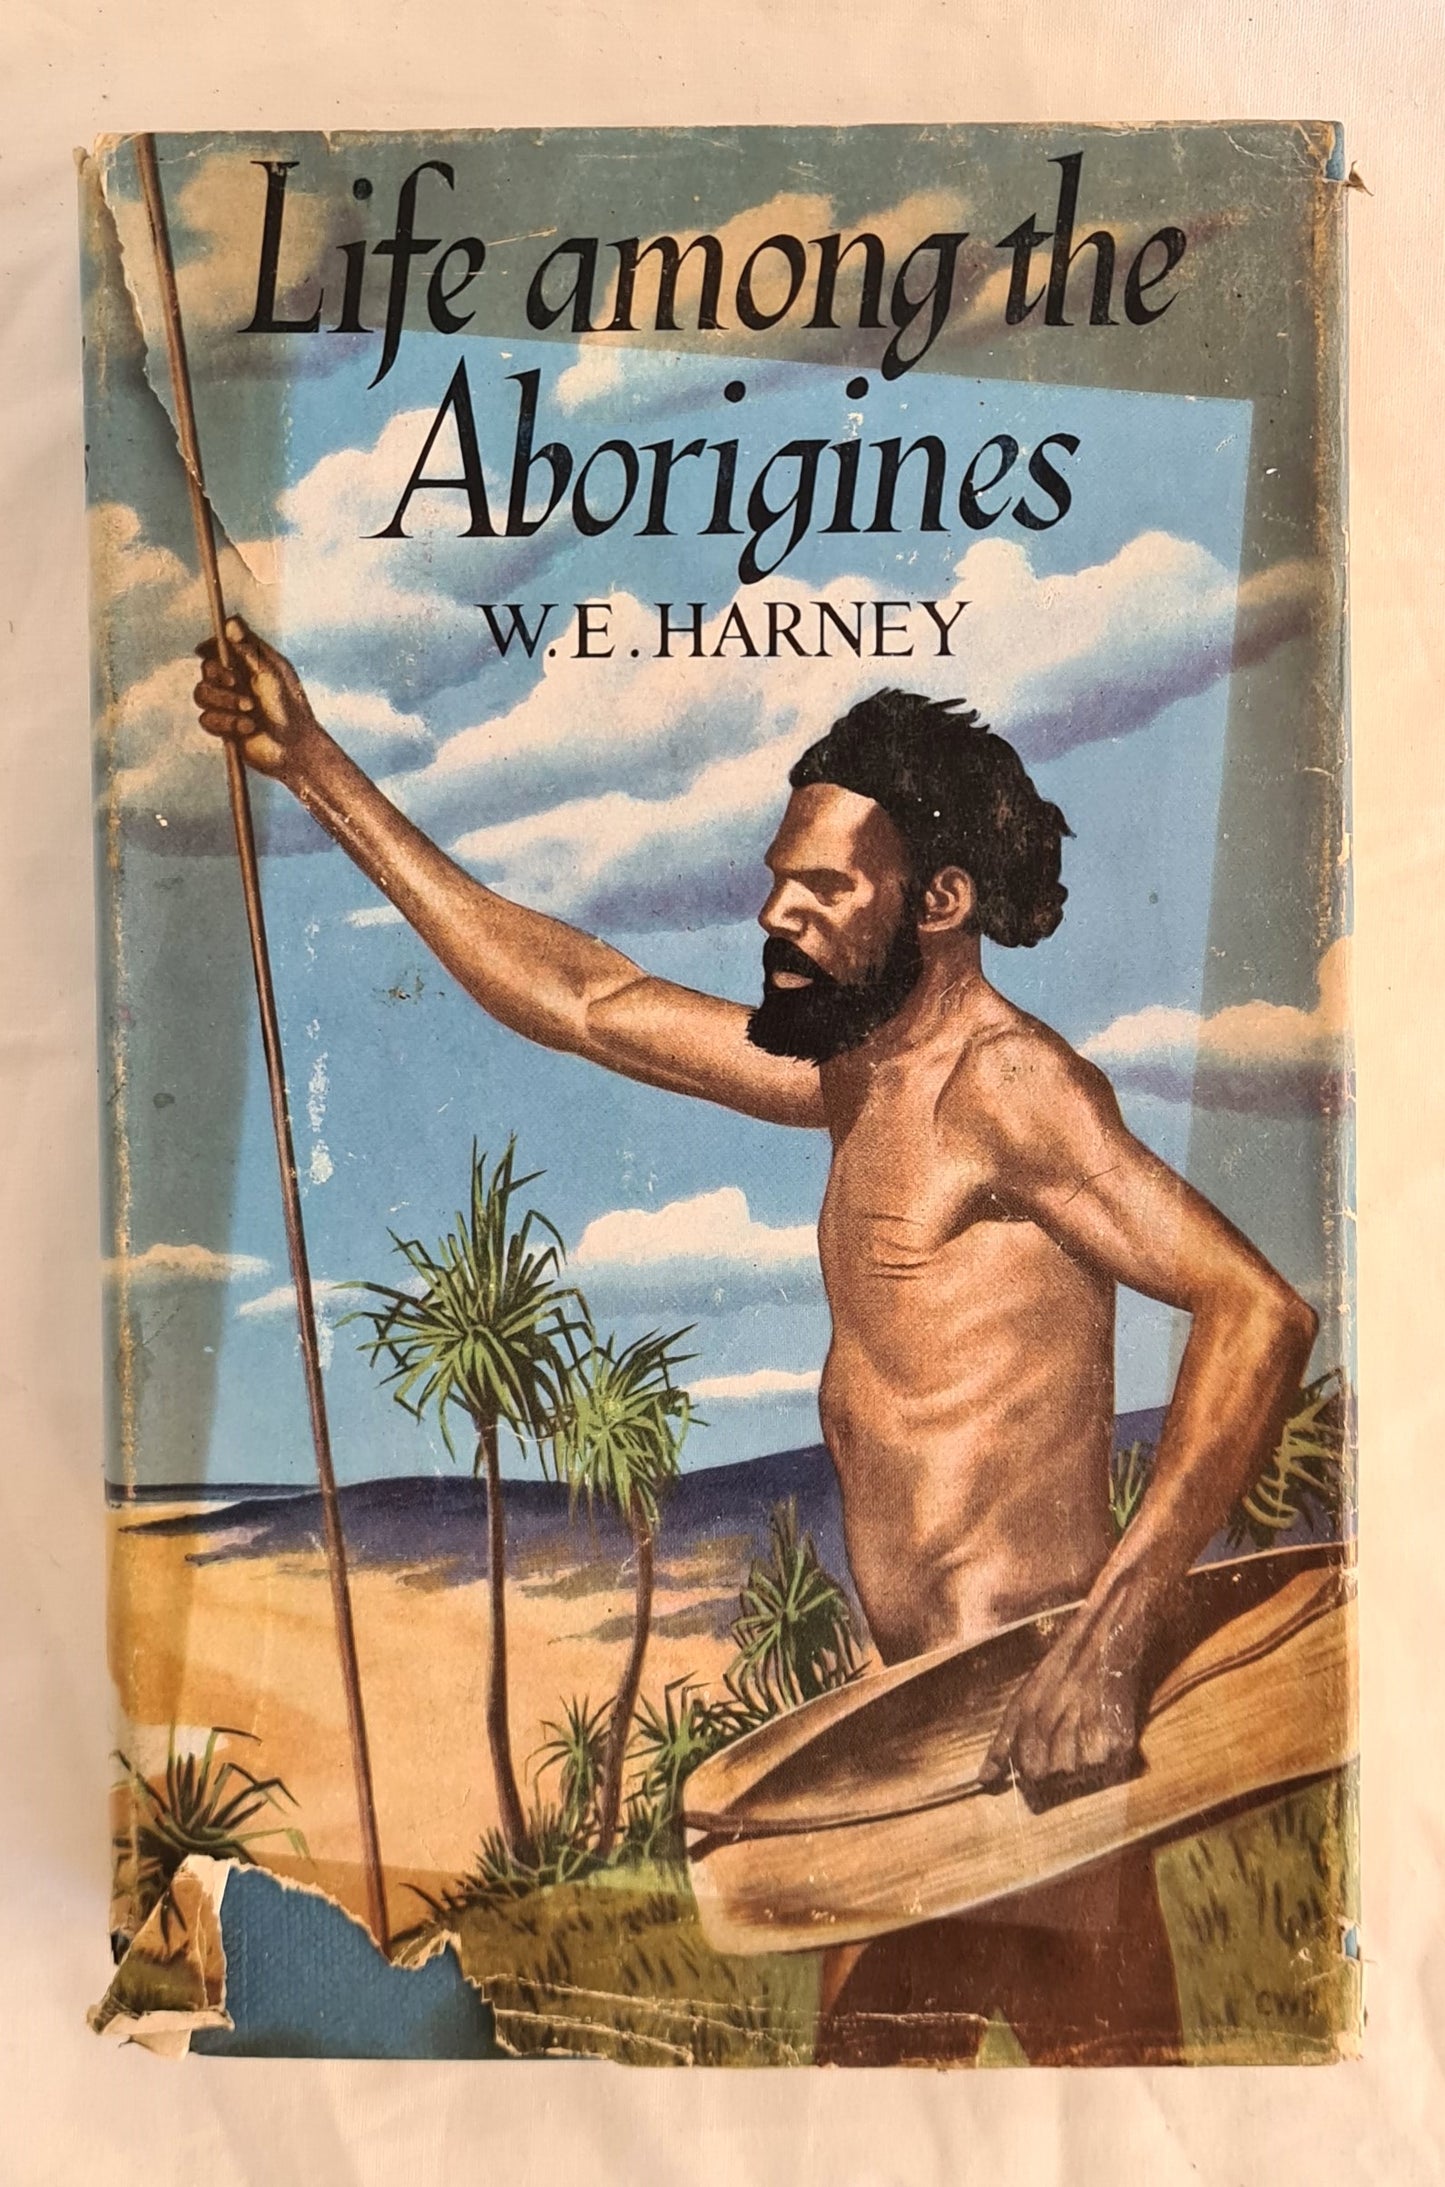 Life Among the Aborigines by W. E. Harney